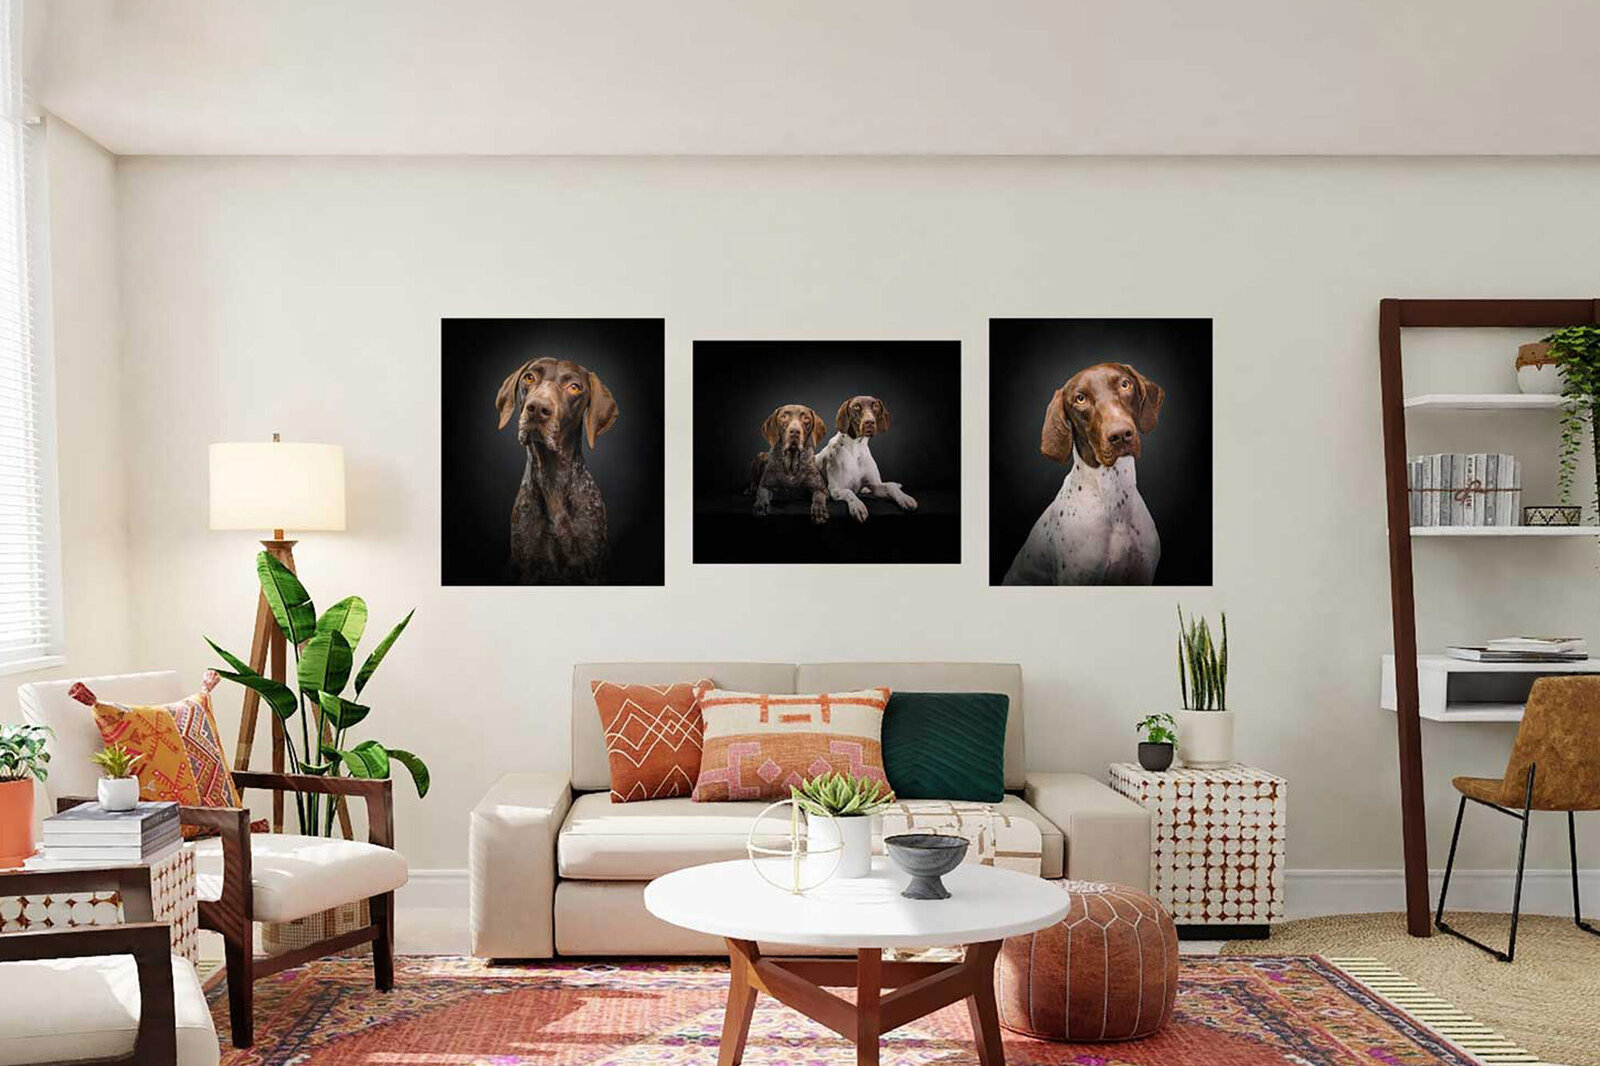 Two dogs shown in large canvas artwork on the wall in brightly decorated home